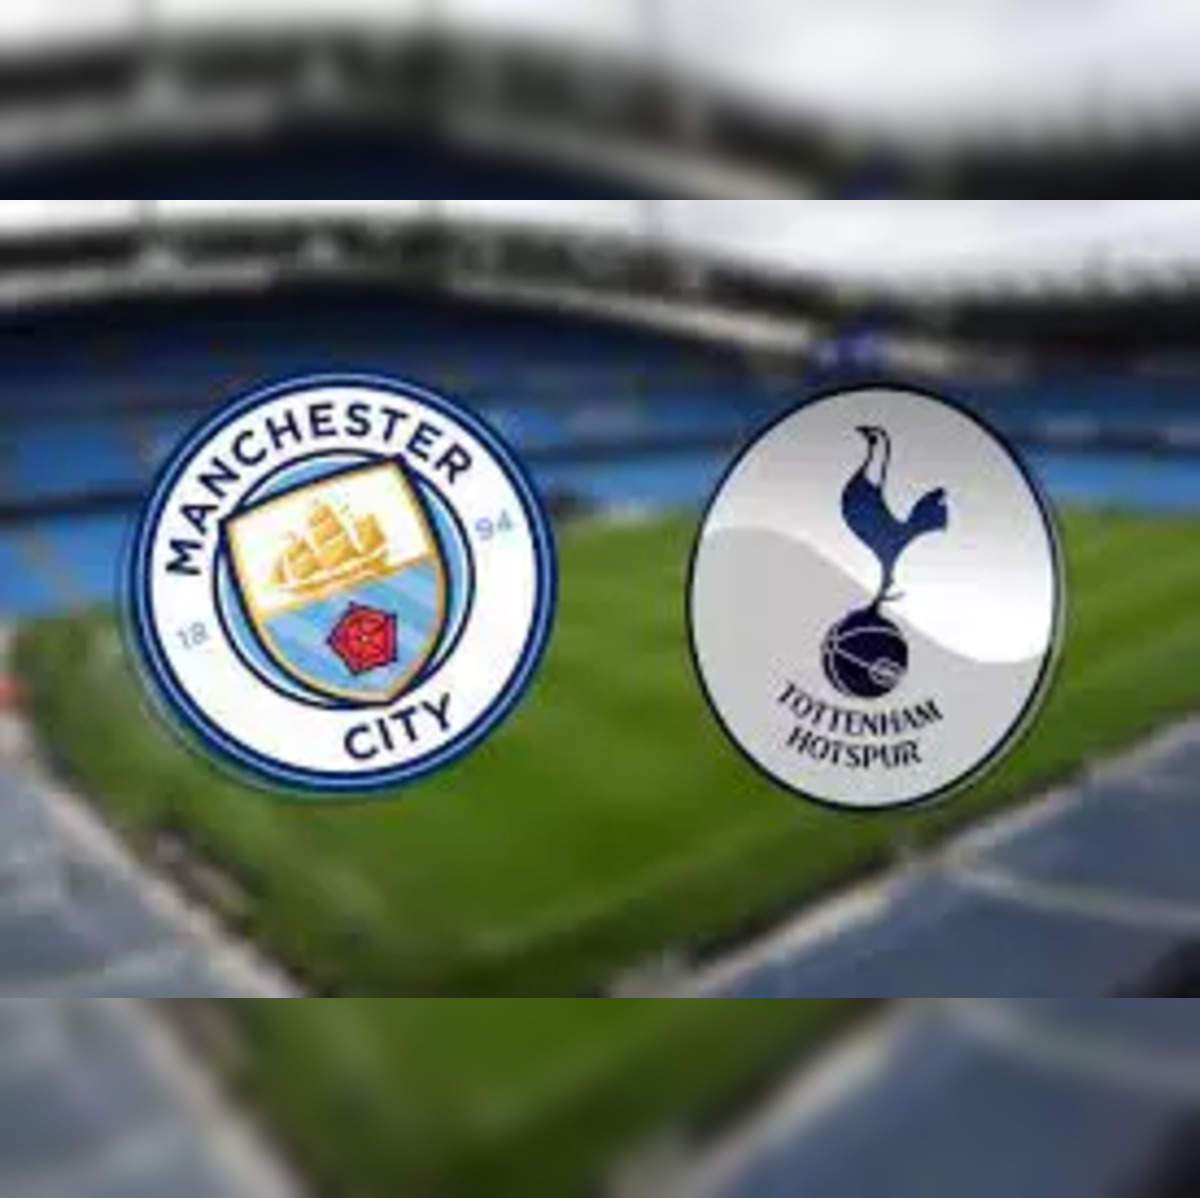 tottenham Manchester City vs Tottenham Hotspur Prediction, results, lineups, kick off time, live stream, channel in US, UK